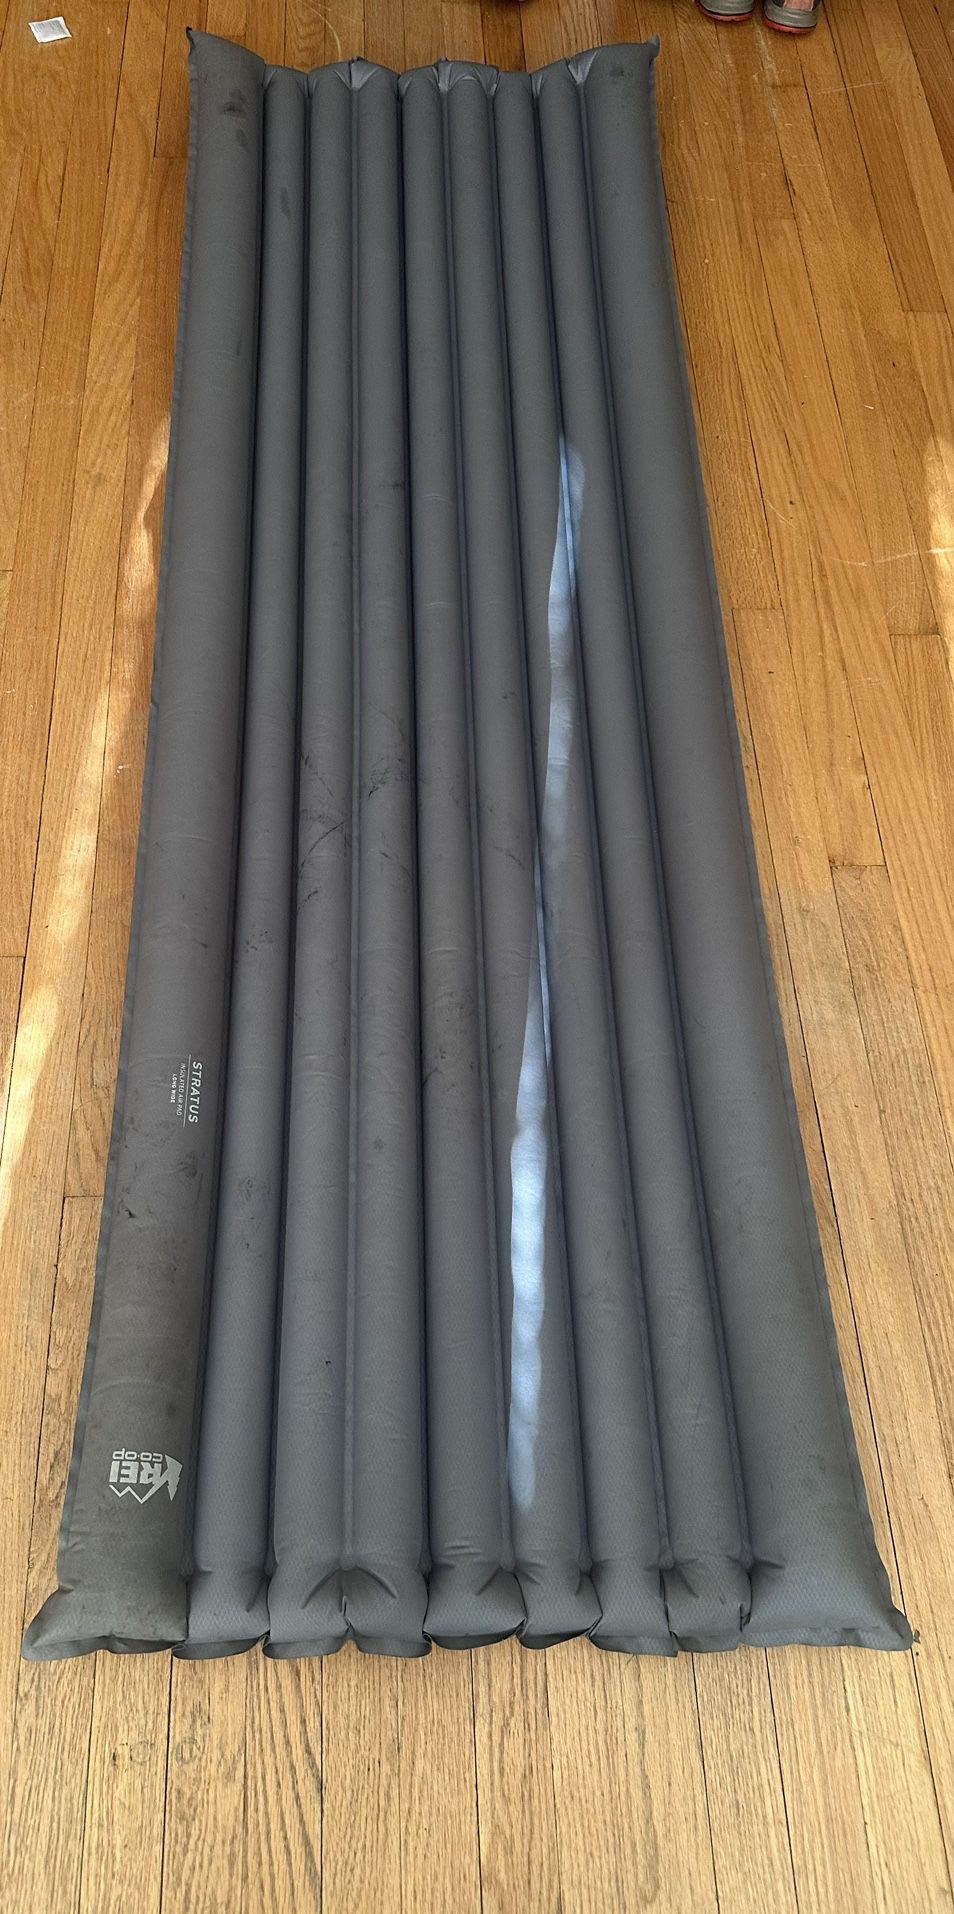 REI Co-op Stratus Insulated Air Sleeping Pad long Wide